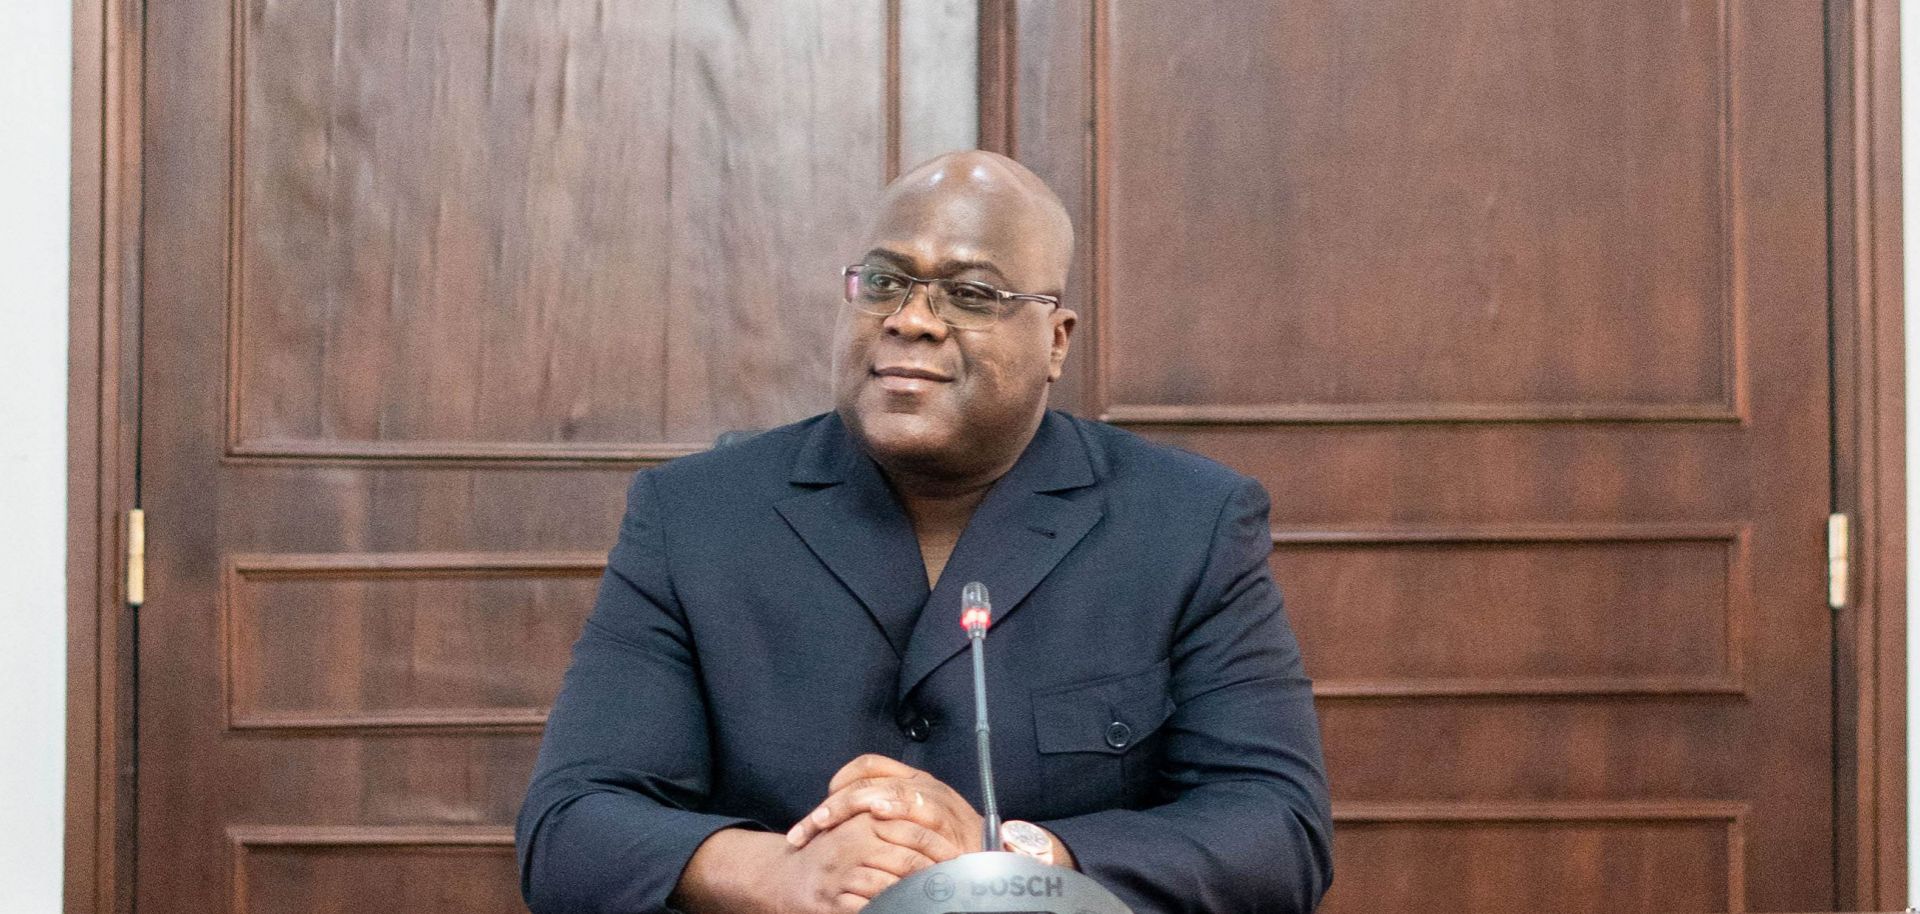 Congolese President Felix Tshisekedi prepares to receive German Foreign Minister Heiko Maas in the presidential palace in Kinshasa on Sept. 5, 2019.